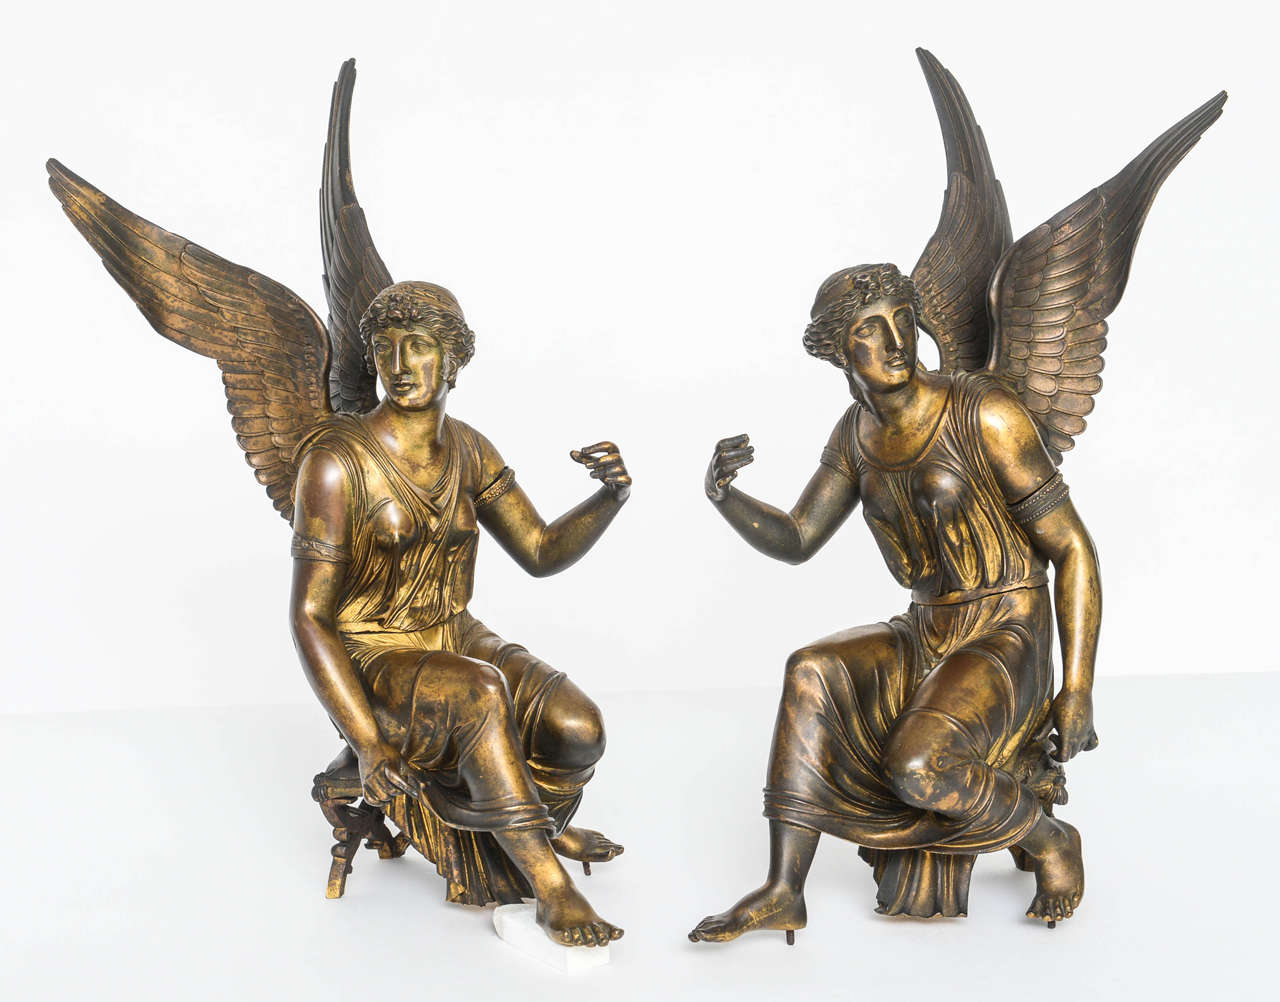 This arrestingly beautiful pair of gilt bronze depictions of Nike the goddess of victory seated on curule stools. They are near mirror images of each other. The arms are outstretched and may have once grasped poles surmounted with laurel wreaths.